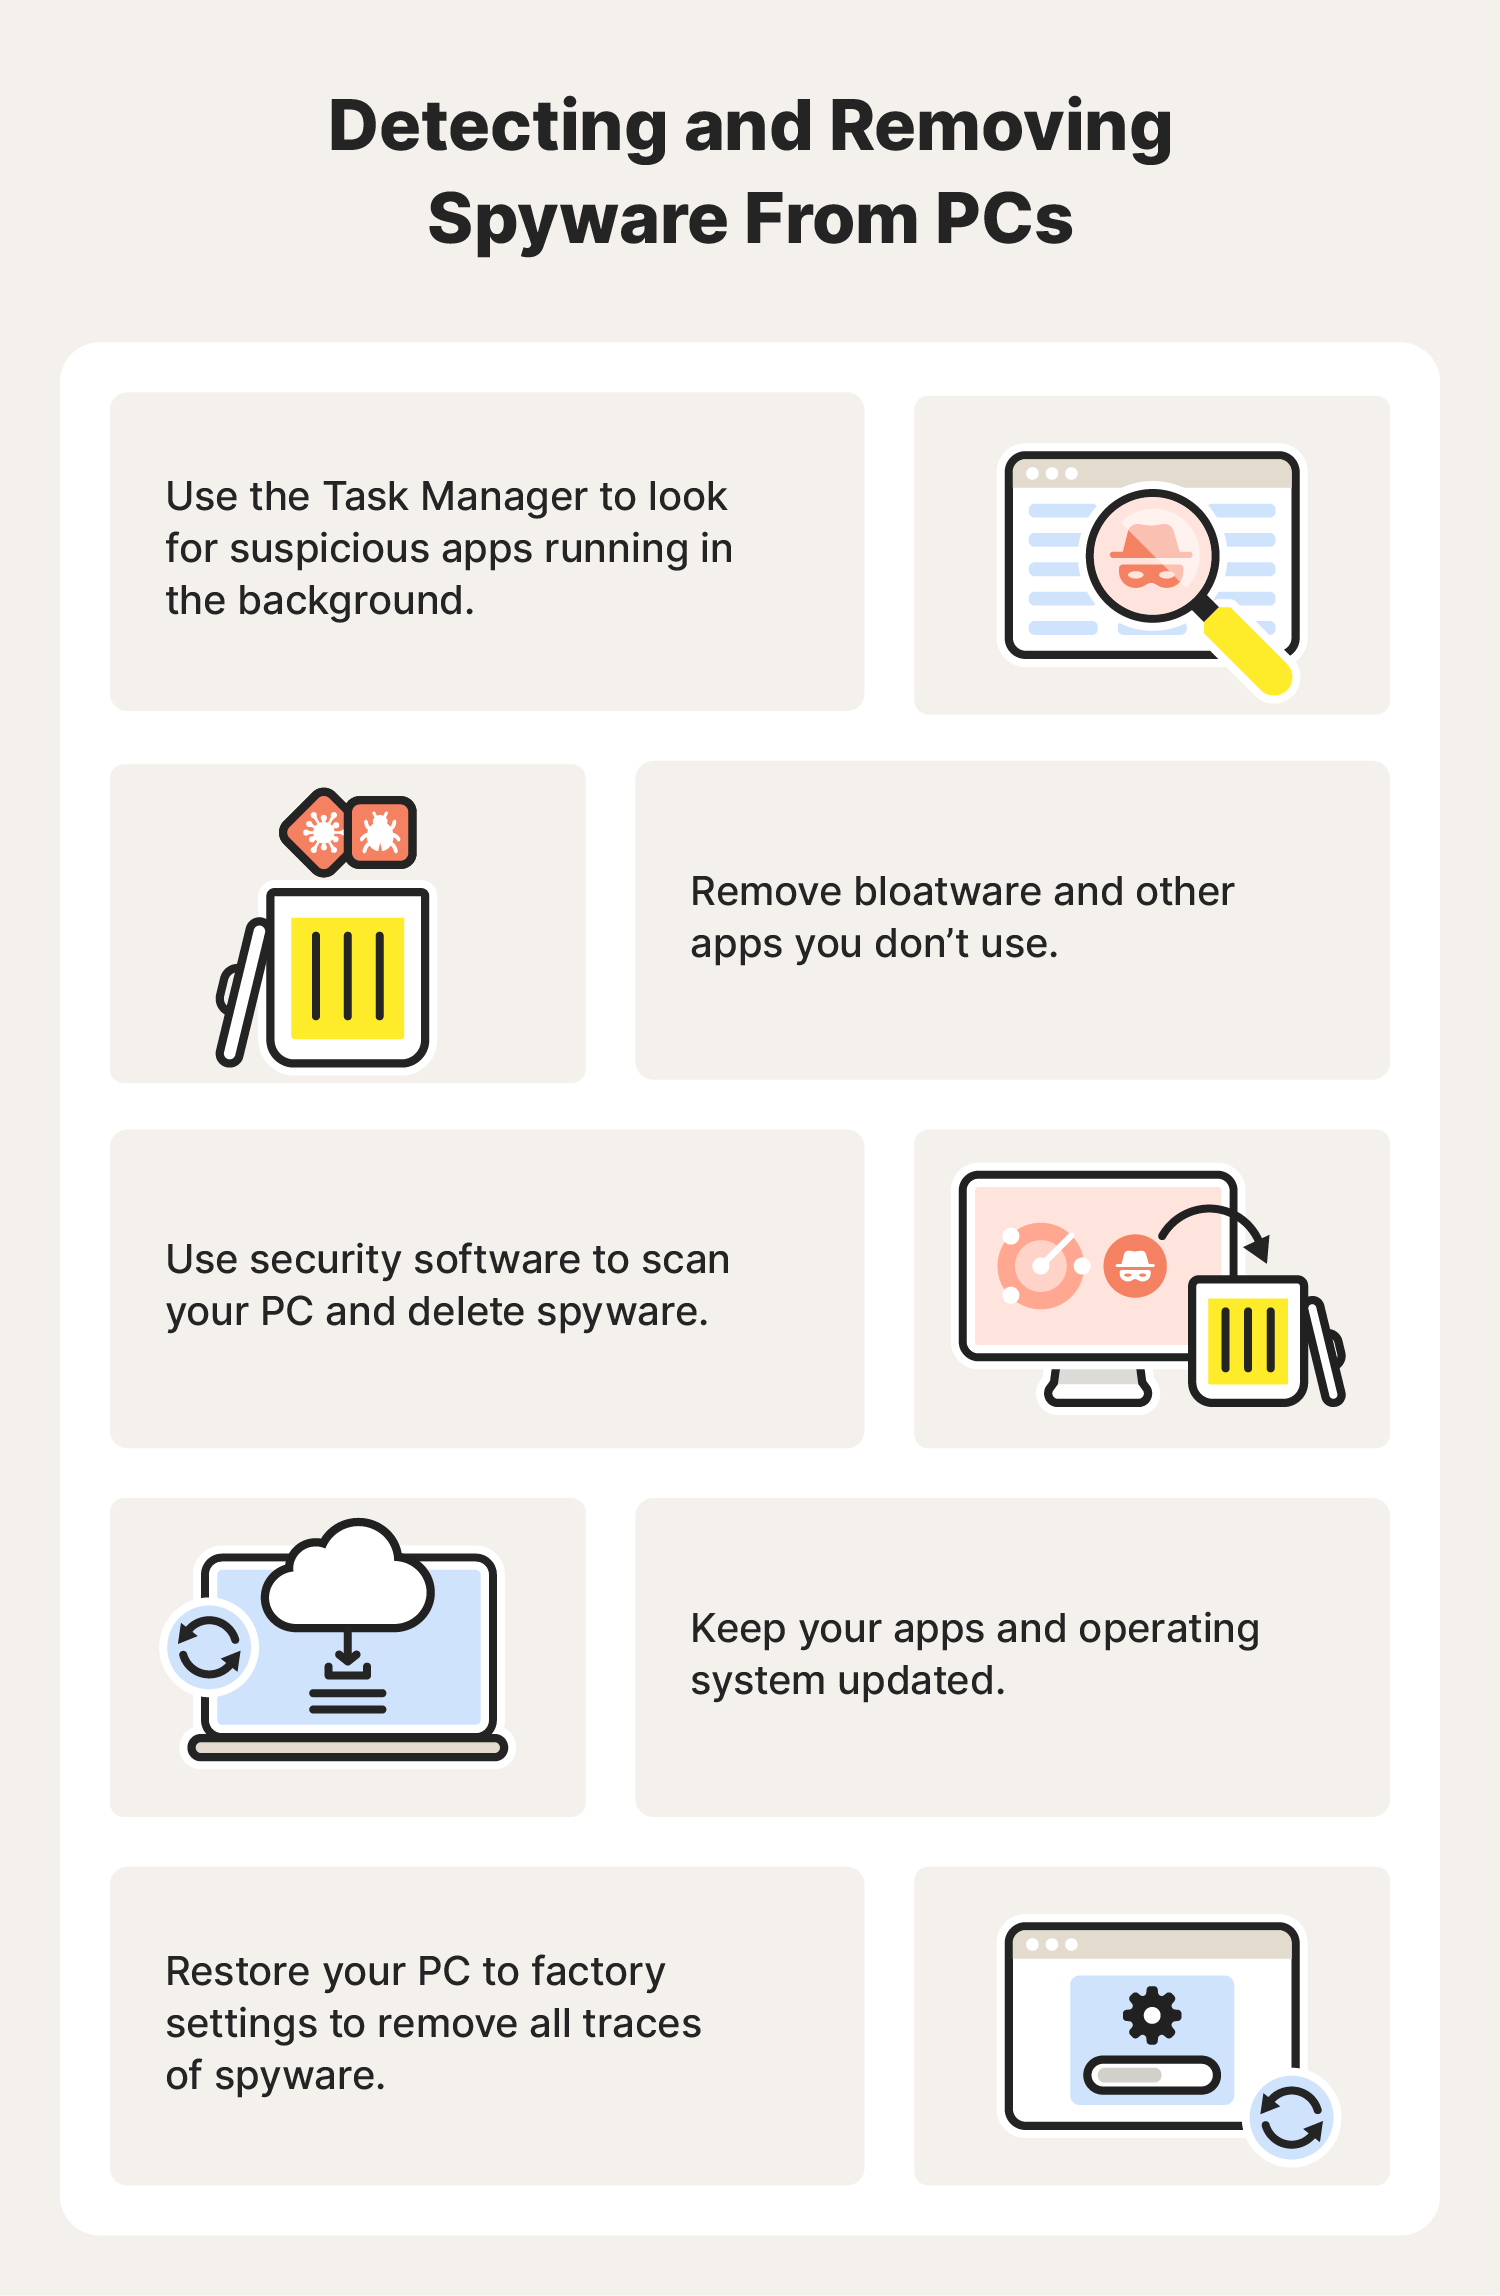 Illustrated chart with tips for detecting and removing spyware from PCs.